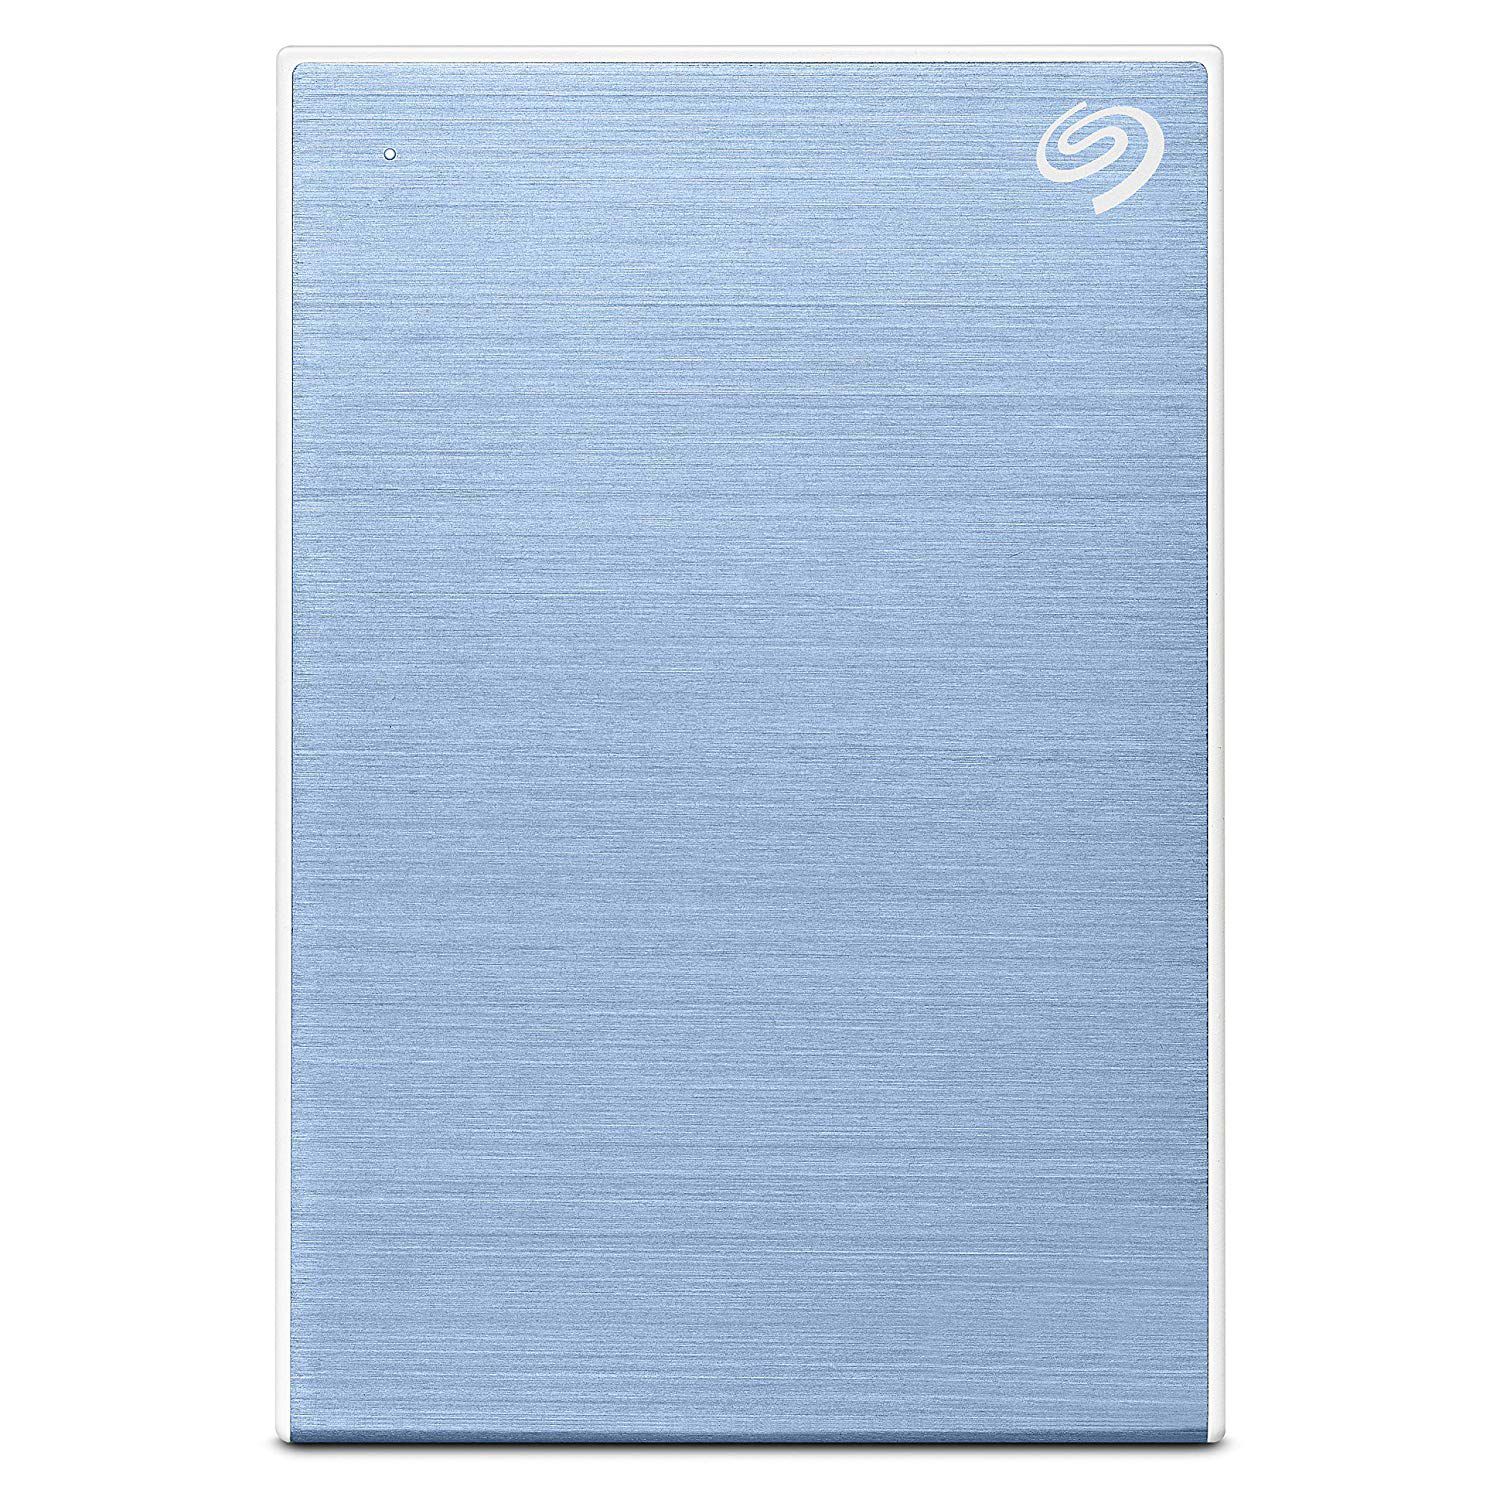     			Seagate Backup Plus Slim 1TB External Hard Drive Portable HDD-Light Blue USB 3.0 for PC Laptop and Mac, 1 year Mylio Create, 4 Months Adobe CC Photography, and 3-year Rescue Services (STHN1000402)